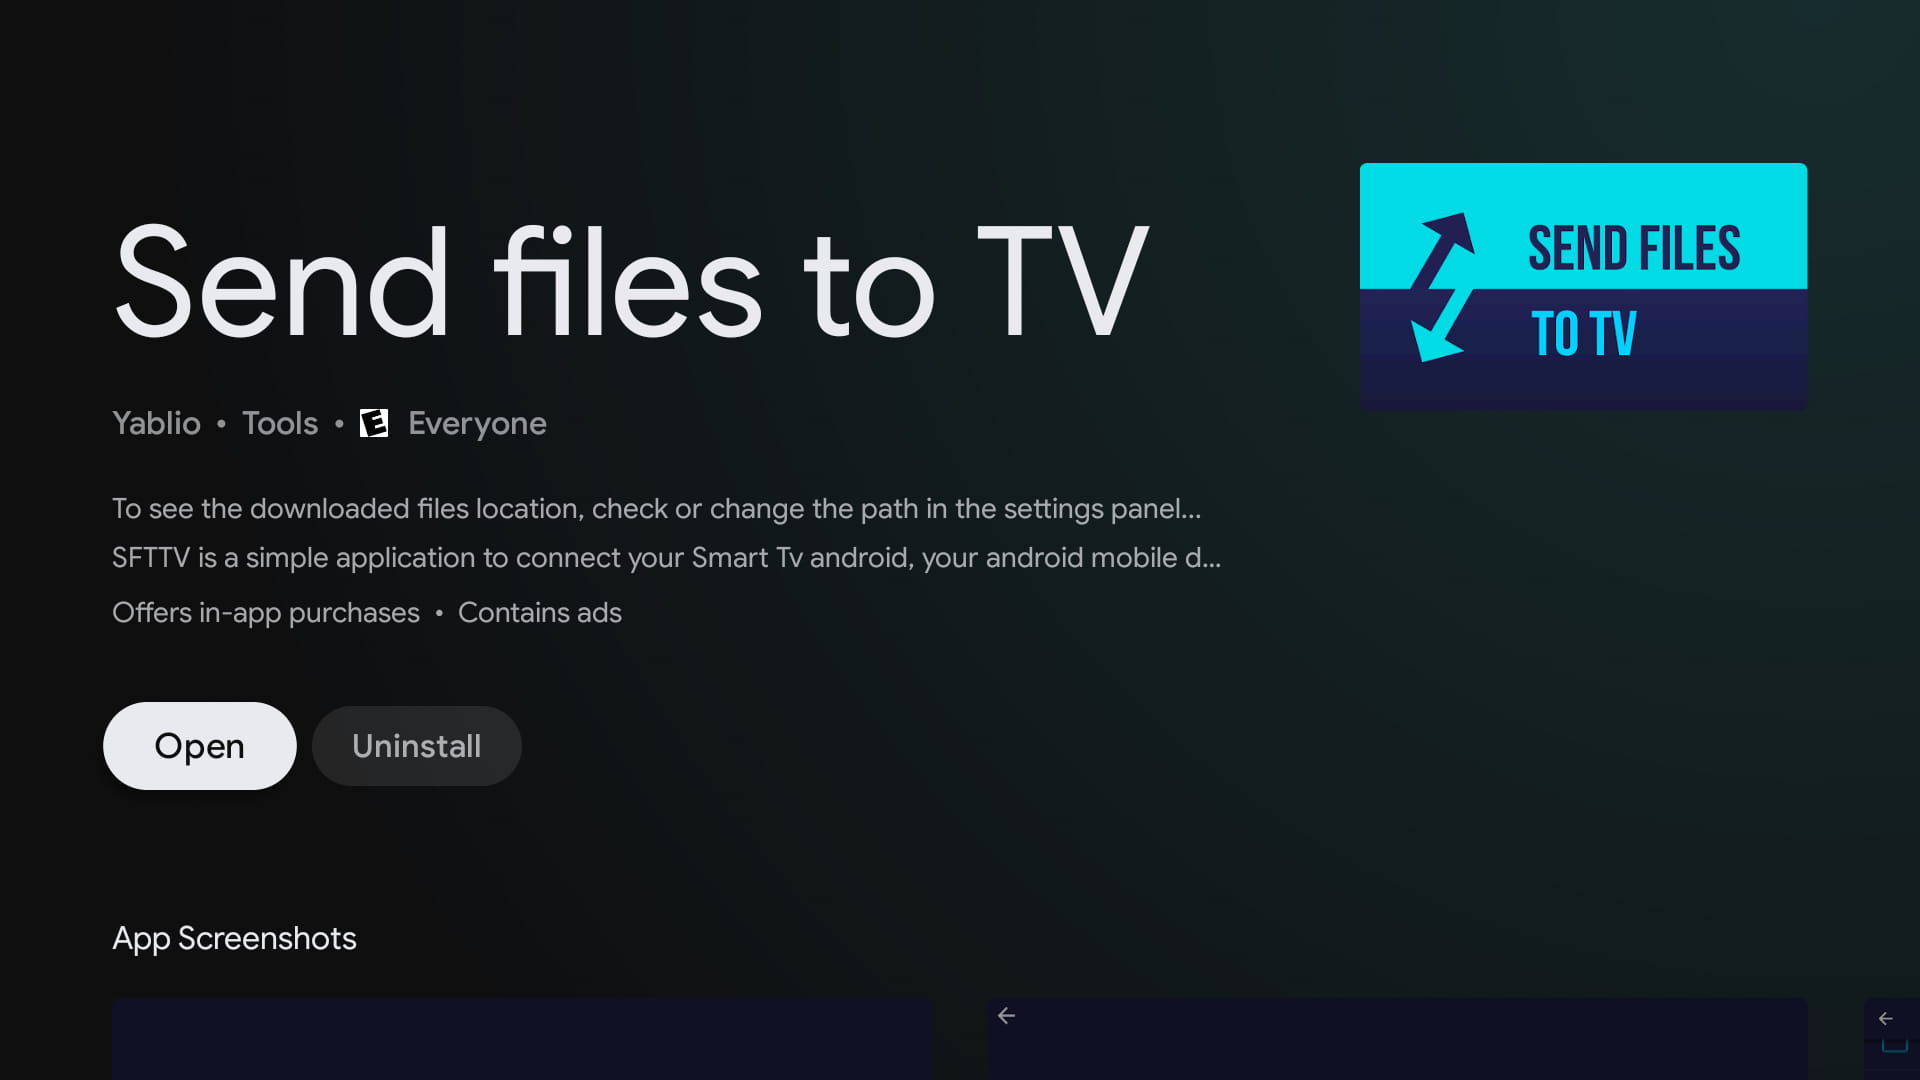 Using a Wireless Connection with Send Files to the TV App